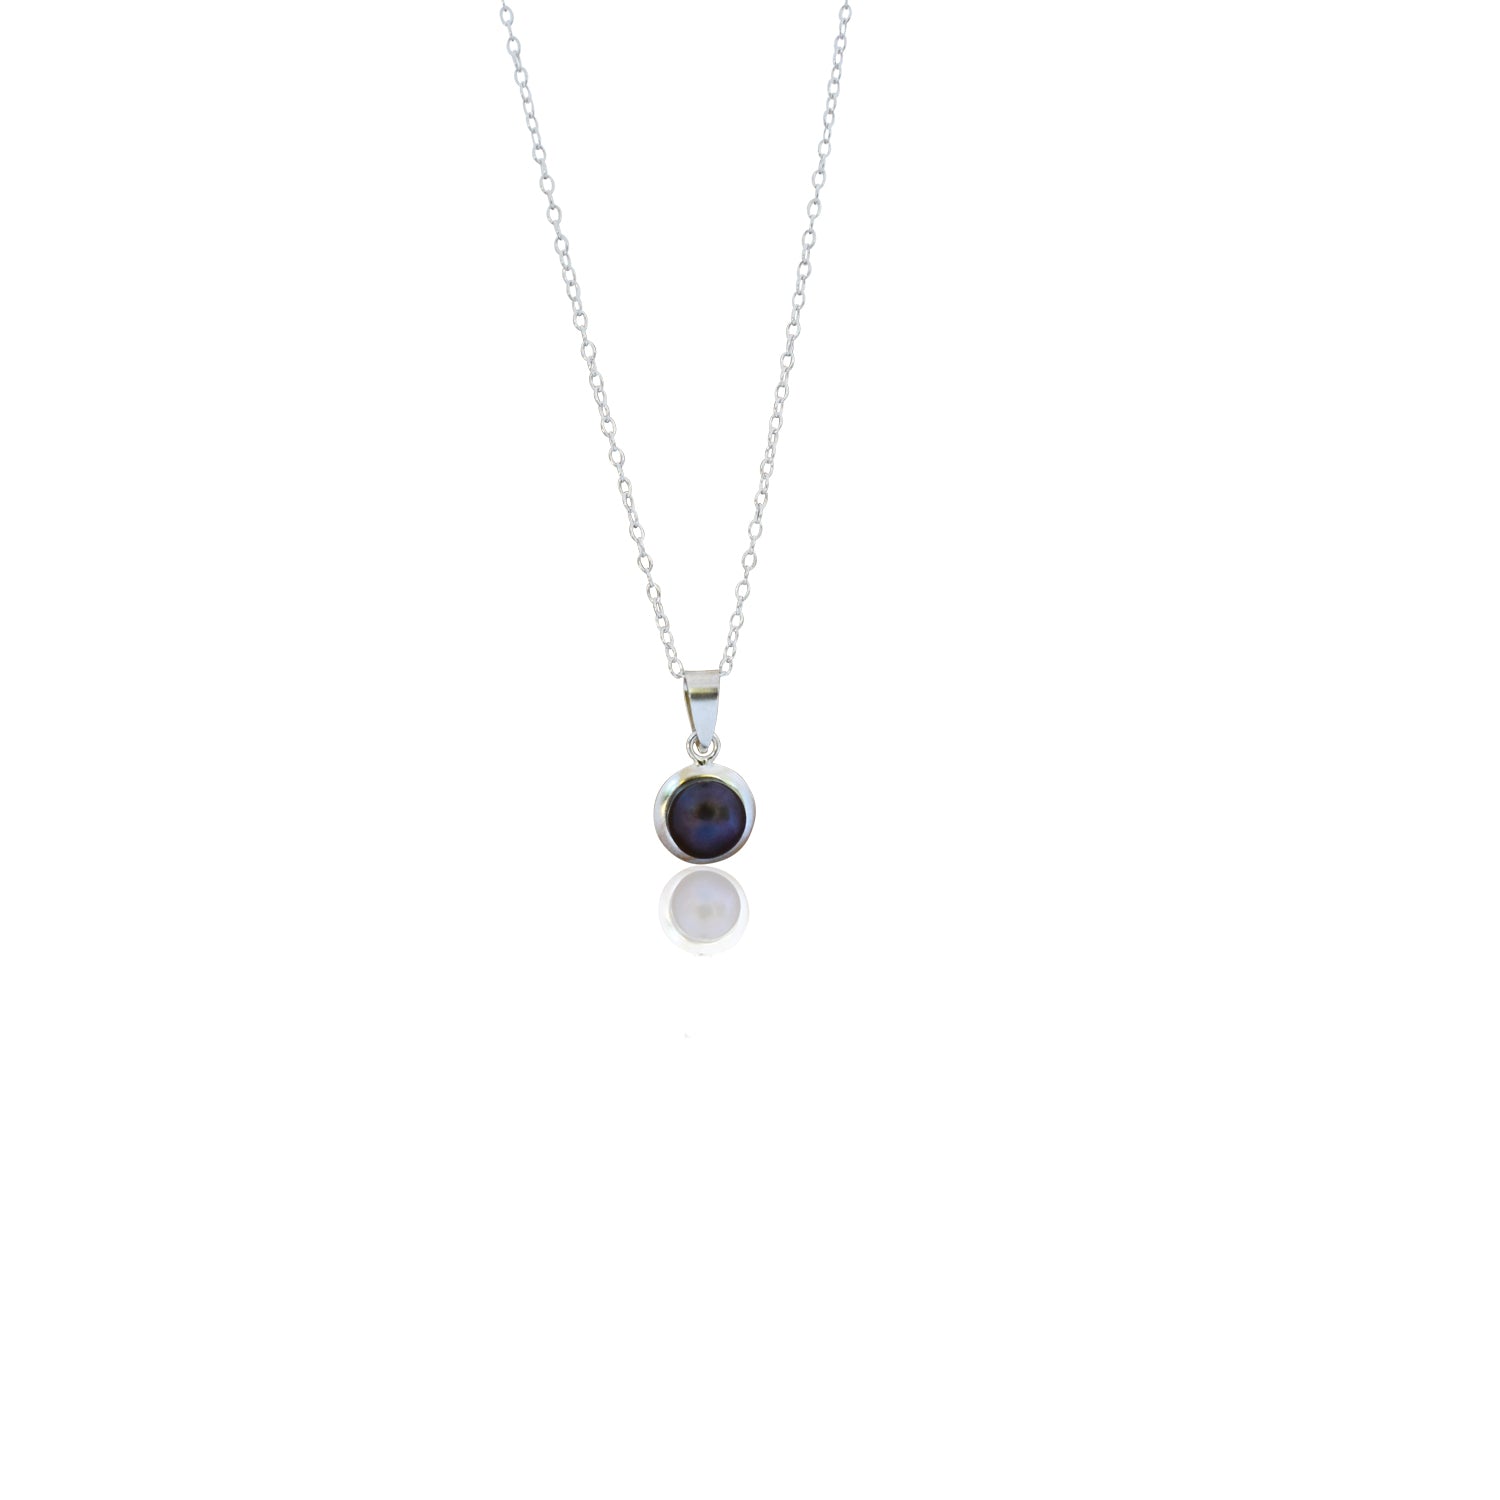 Black Freshwater Pearl Encased In Sterling Silver, .925 Sterling Silver Necklace, Bloom Collection | by nlanlaVictory-0